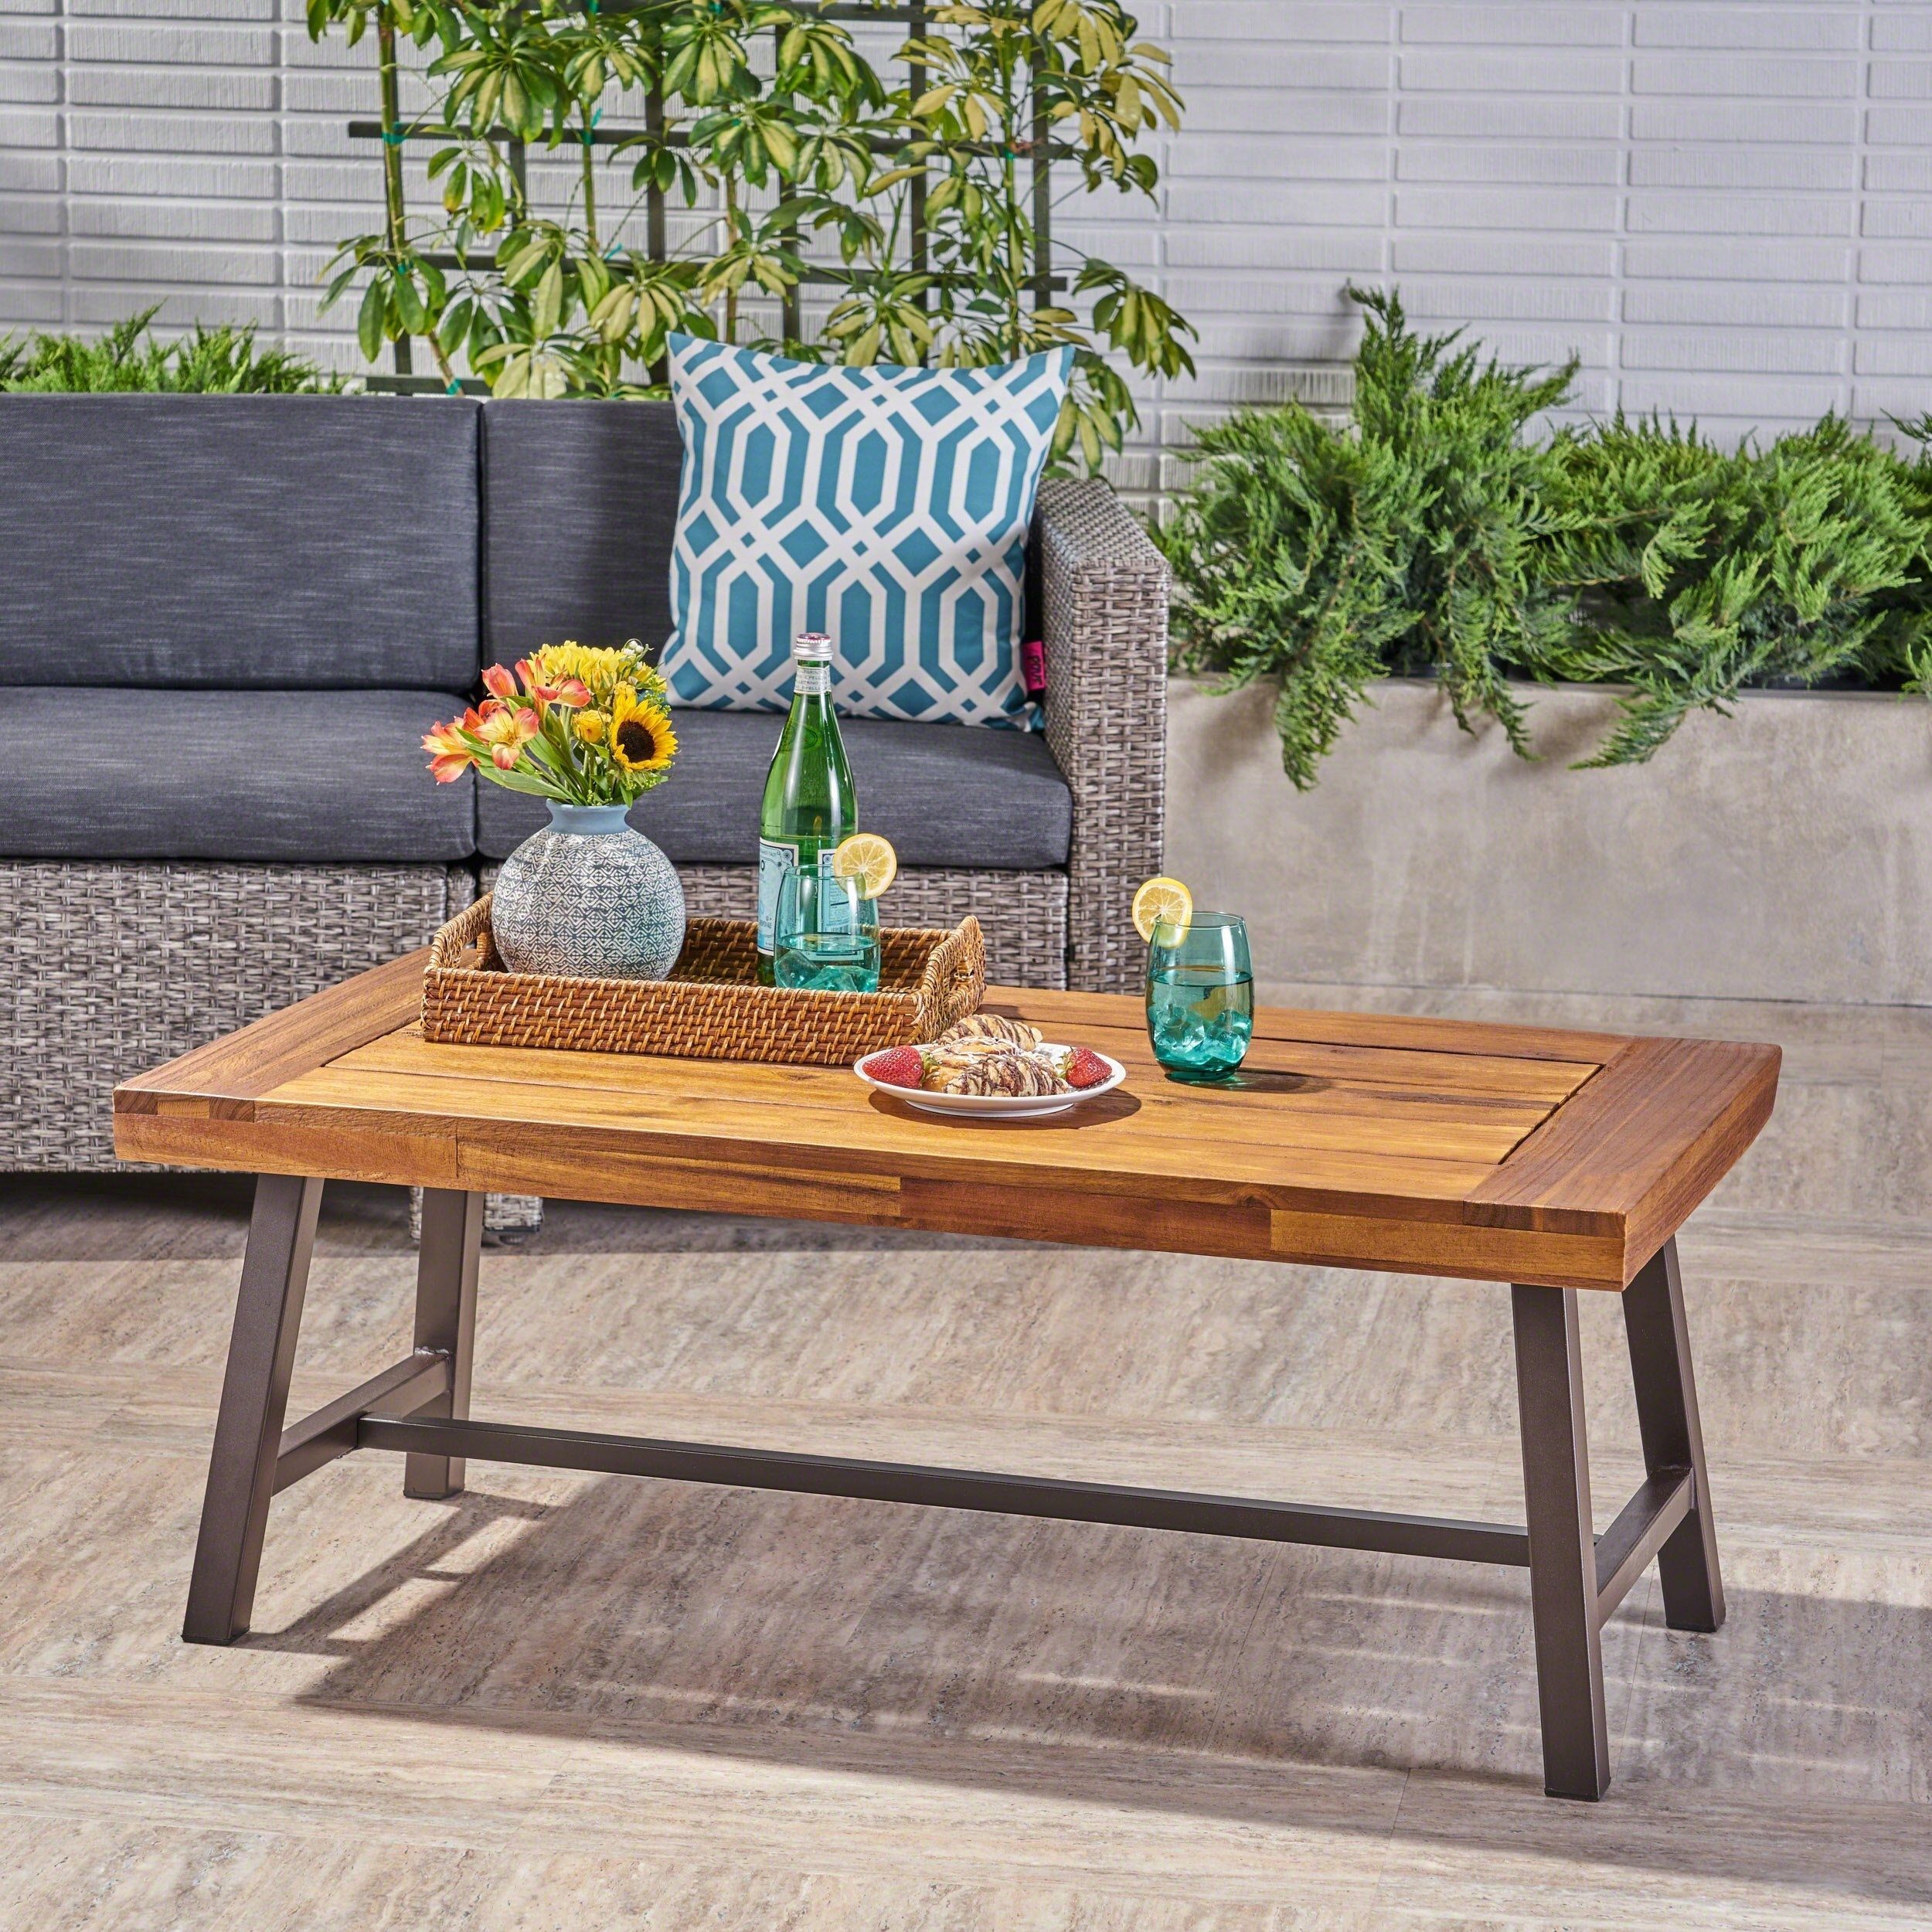 The Benefits Of A Small Outdoor Coffee Table – Coffee Table Decor For Outdoor Half Round Coffee Tables (Gallery 16 of 20)